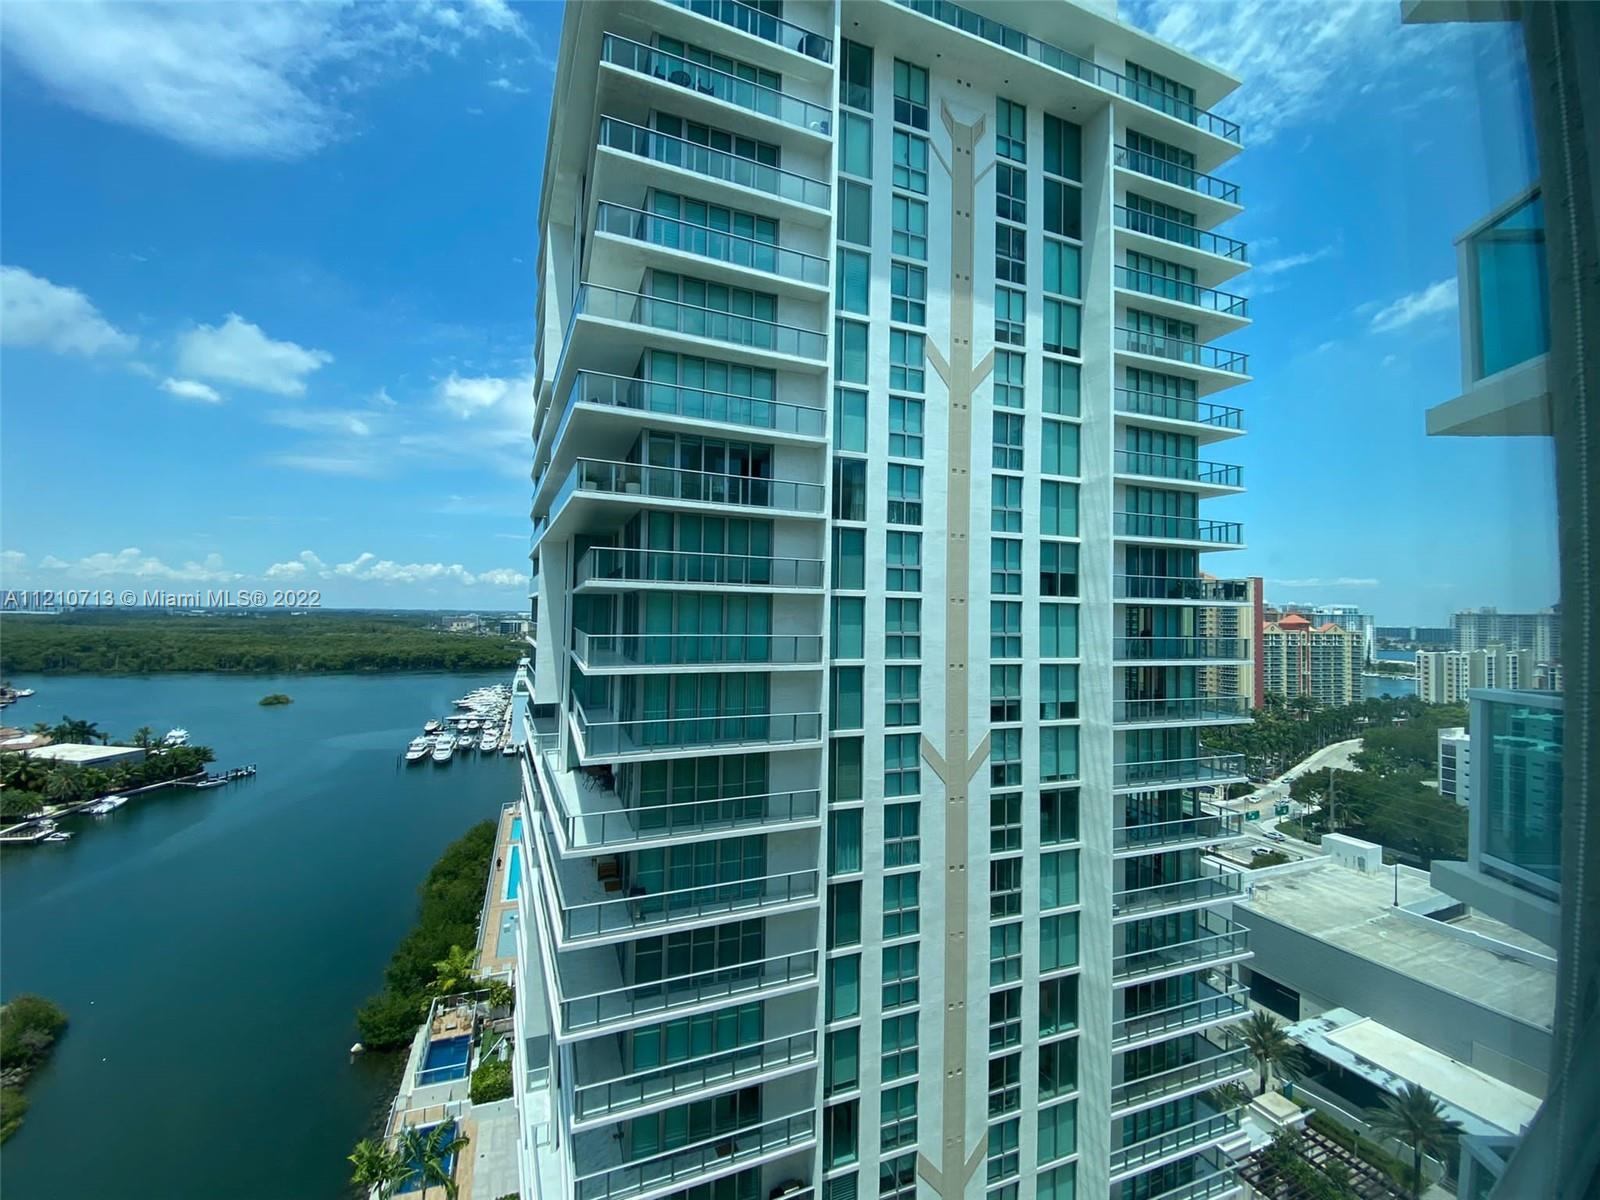 GORGEOUS 3 BEDROOM IN THE PRESTIGIOUS SUNNY ISLES!  AMAZING WATER VIEWS! FULLY UPGRADED.  LOTS OF LI